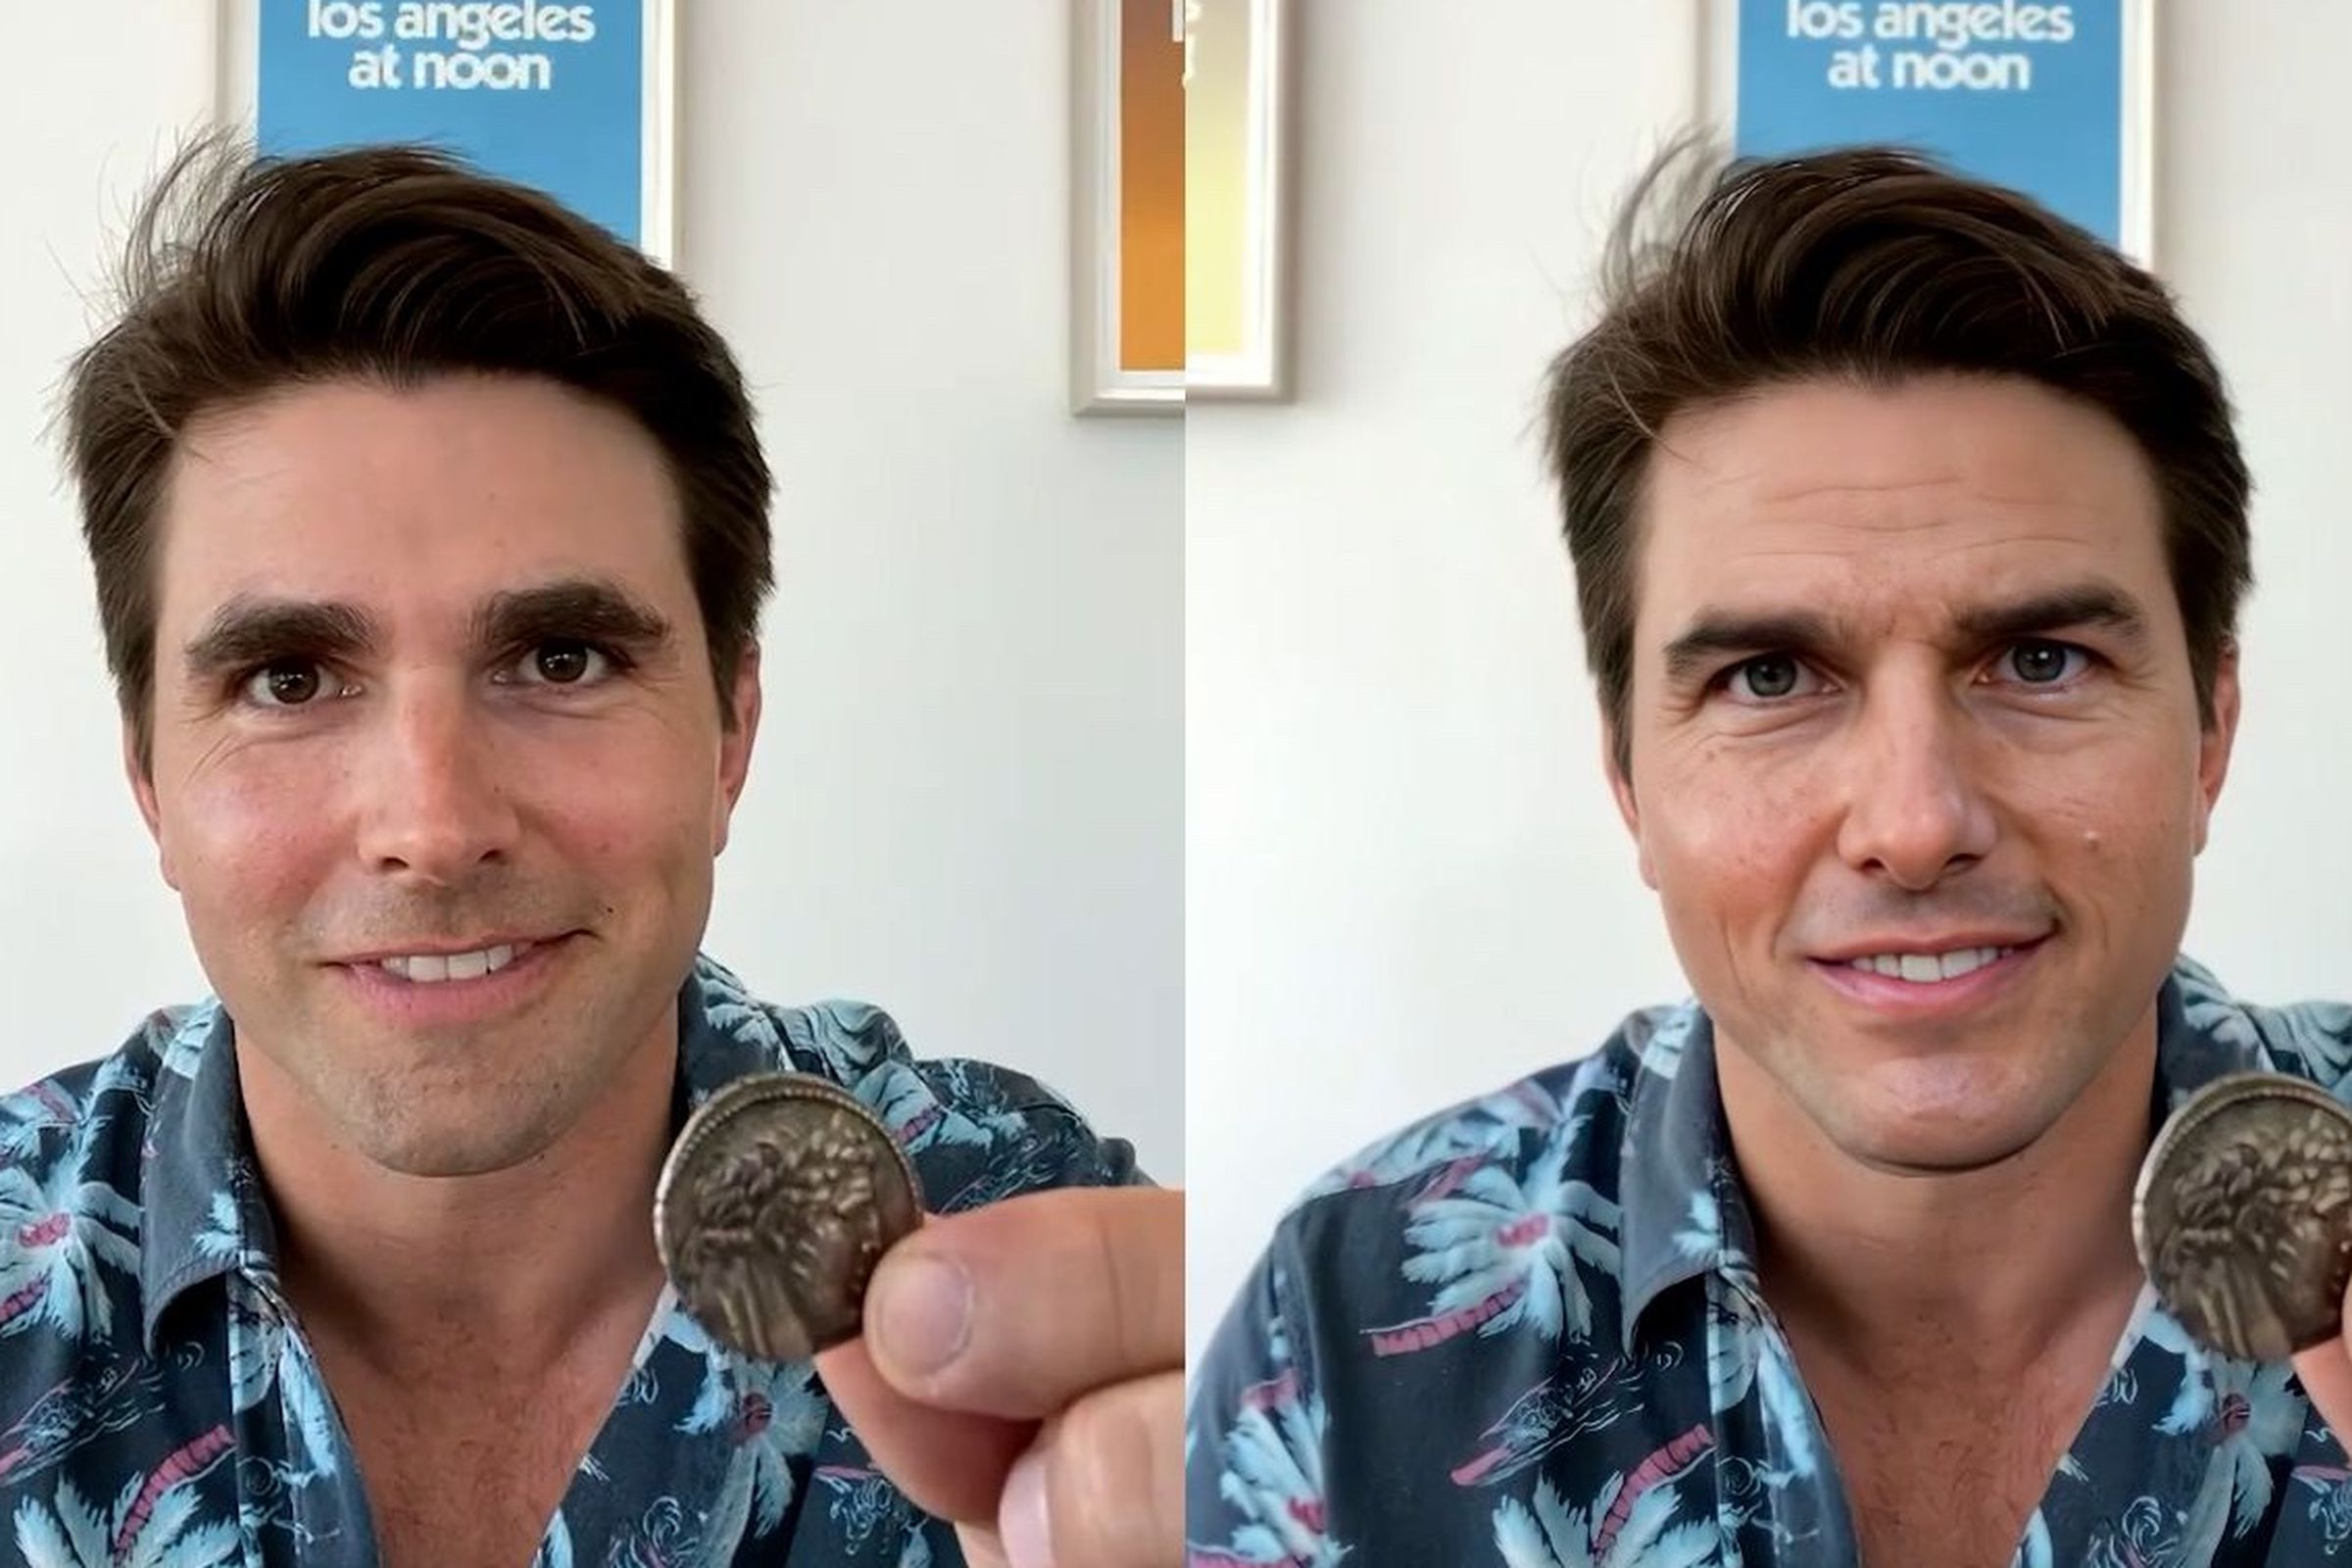 Want to see a magic trick? Tom Cruise impersonator Miles Fisher (left) and the deepfake Tom Cruise created by Chris Ume (right). 